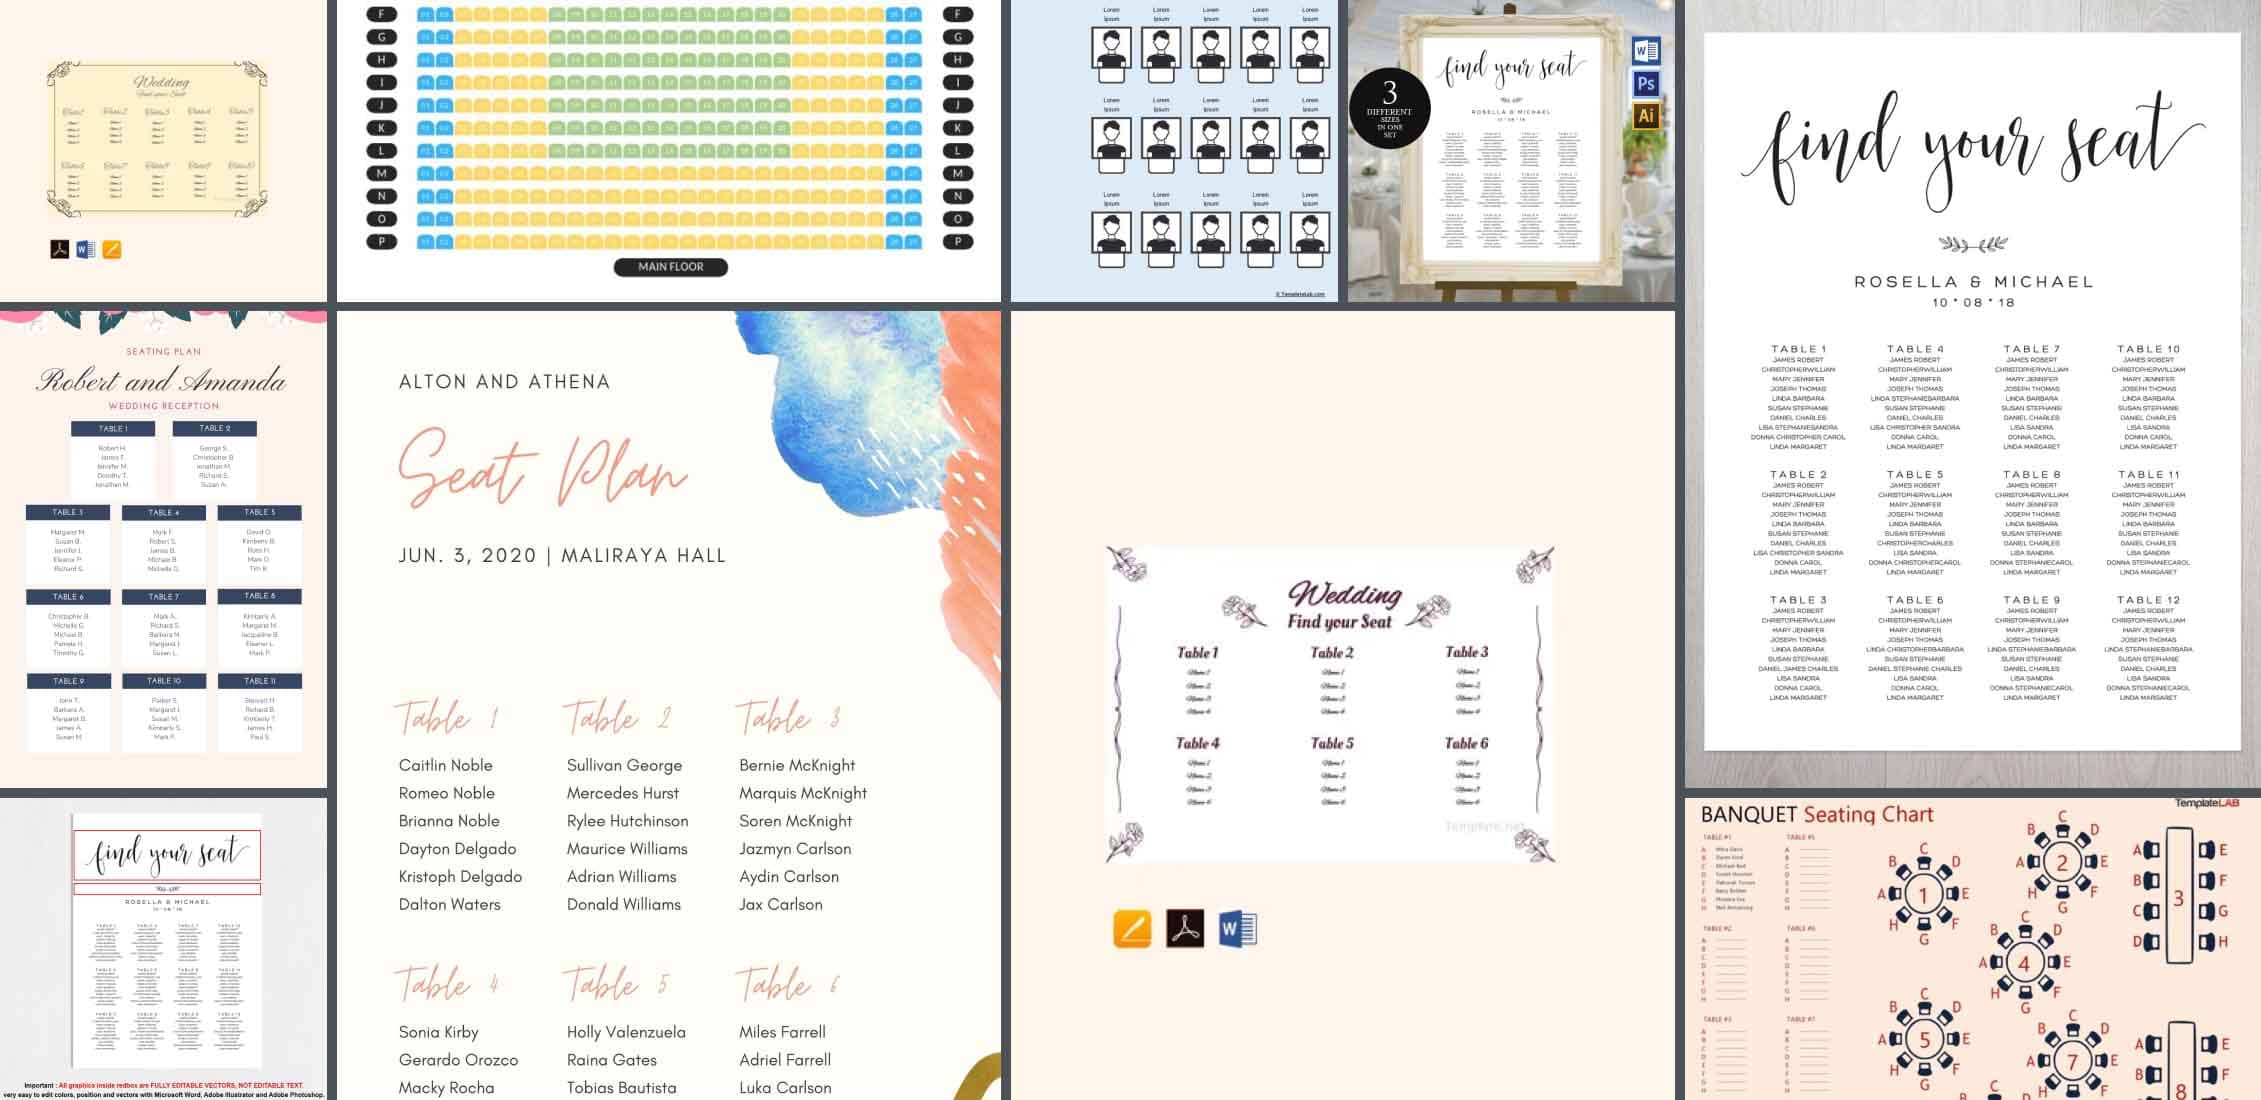 10 Best Wedding Seating Chart Templates Example.